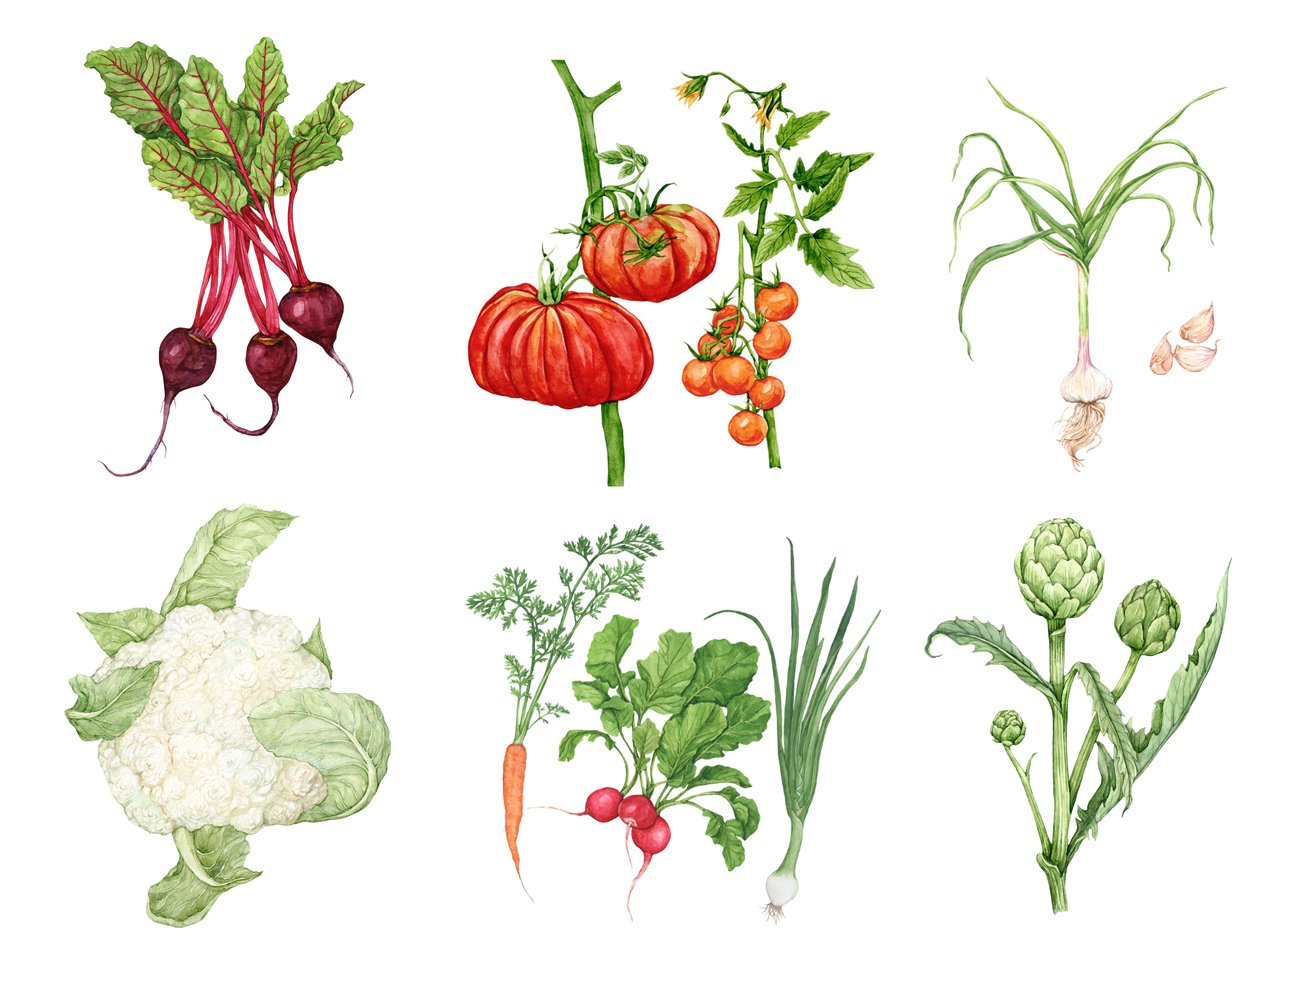 Caring Vegetable Garden: Over 13,214 Royalty-Free Licensable Stock  Illustrations & Drawings | Shutterstock